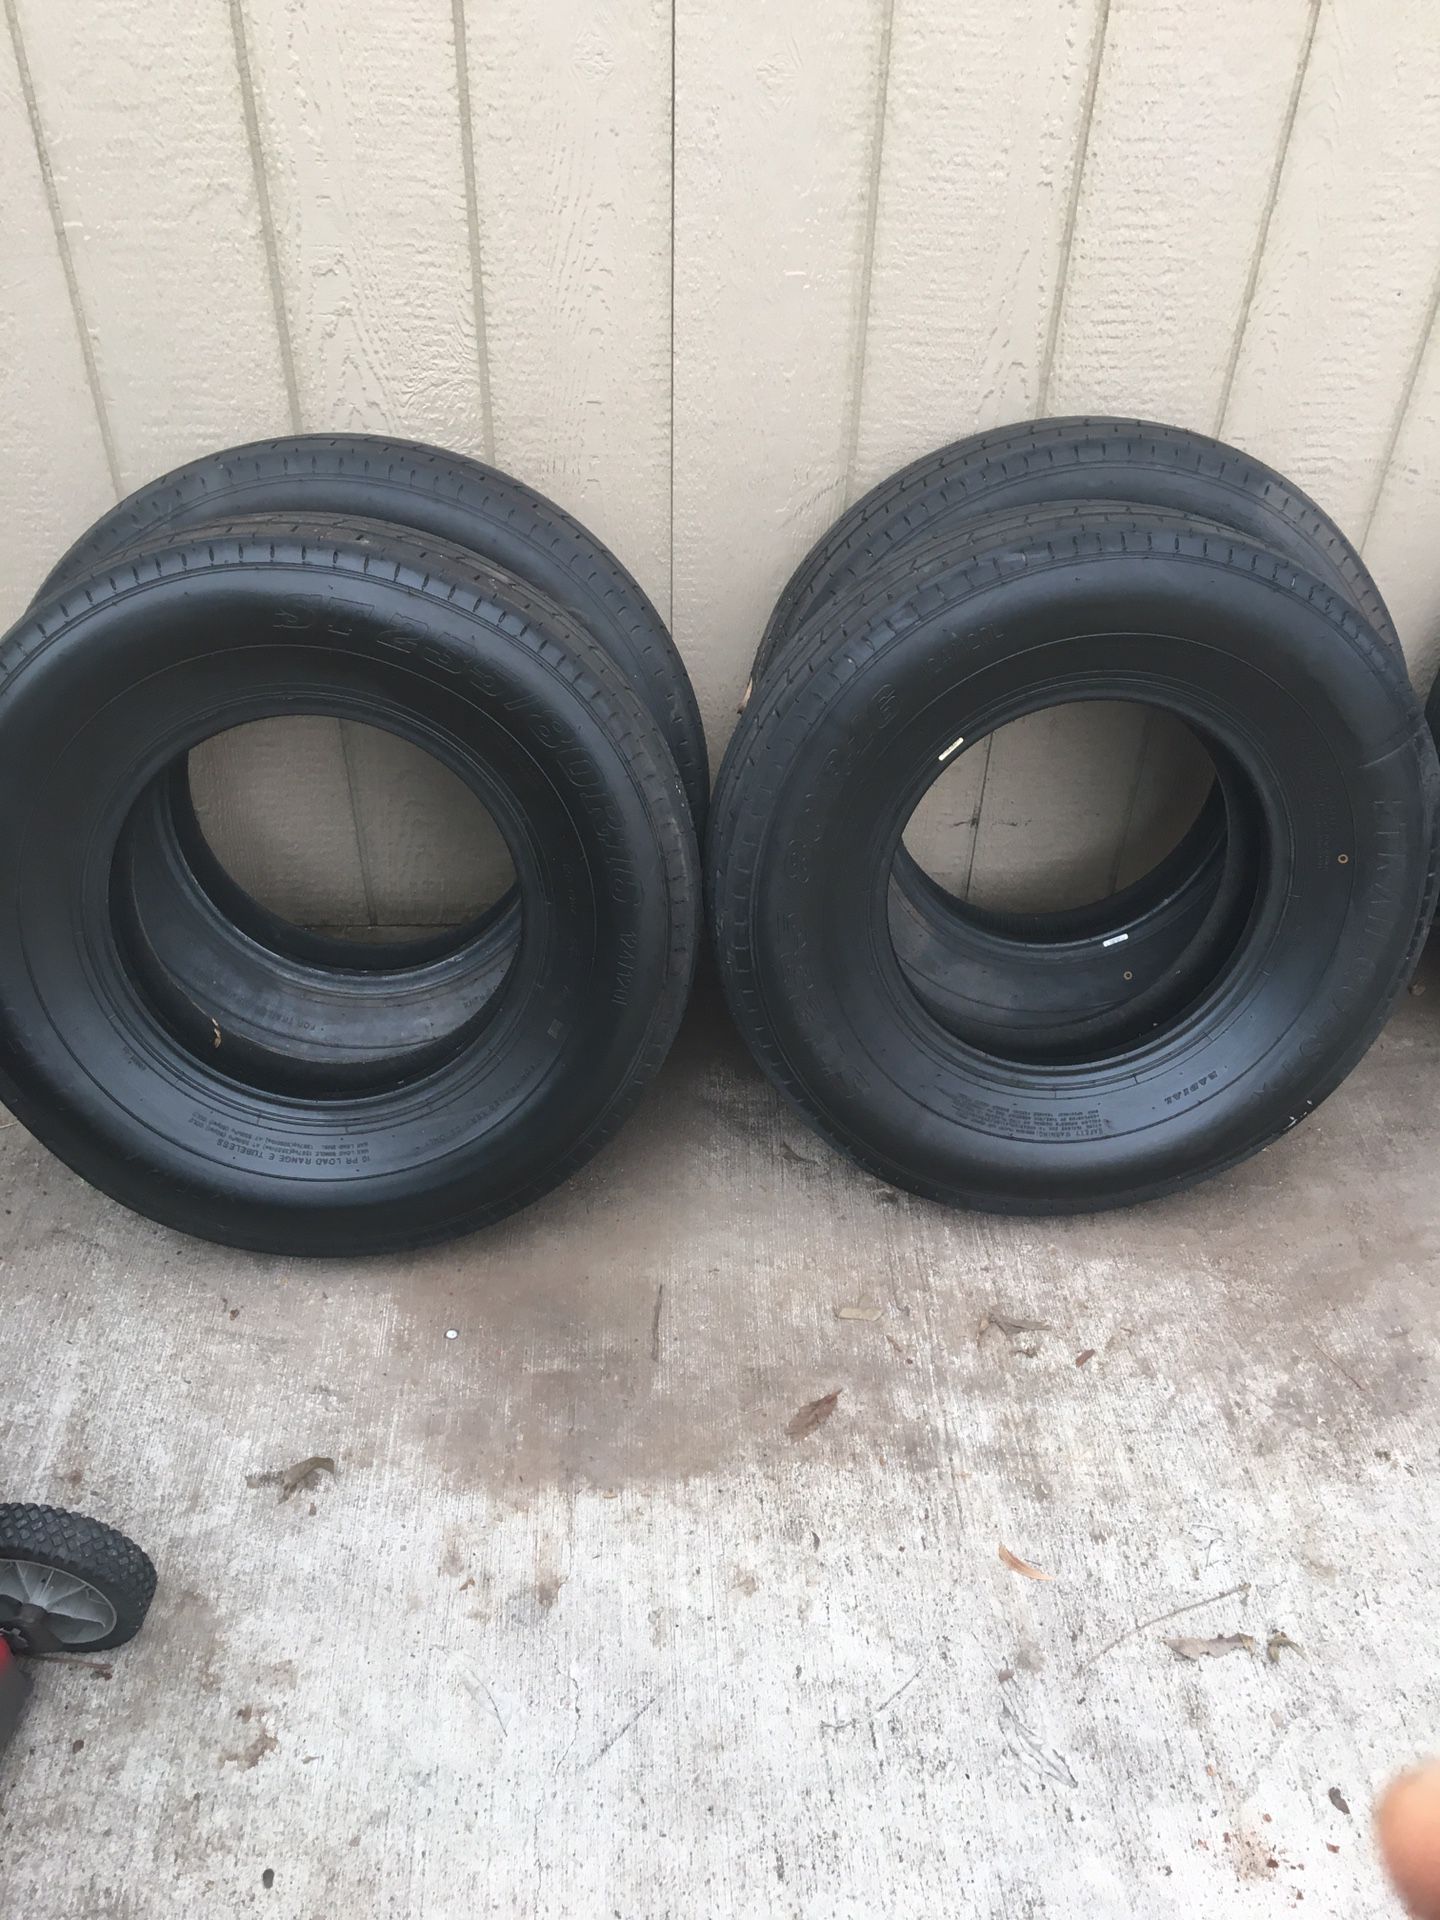 Trailer tire 235 80 r16 80 psi used one day almost new